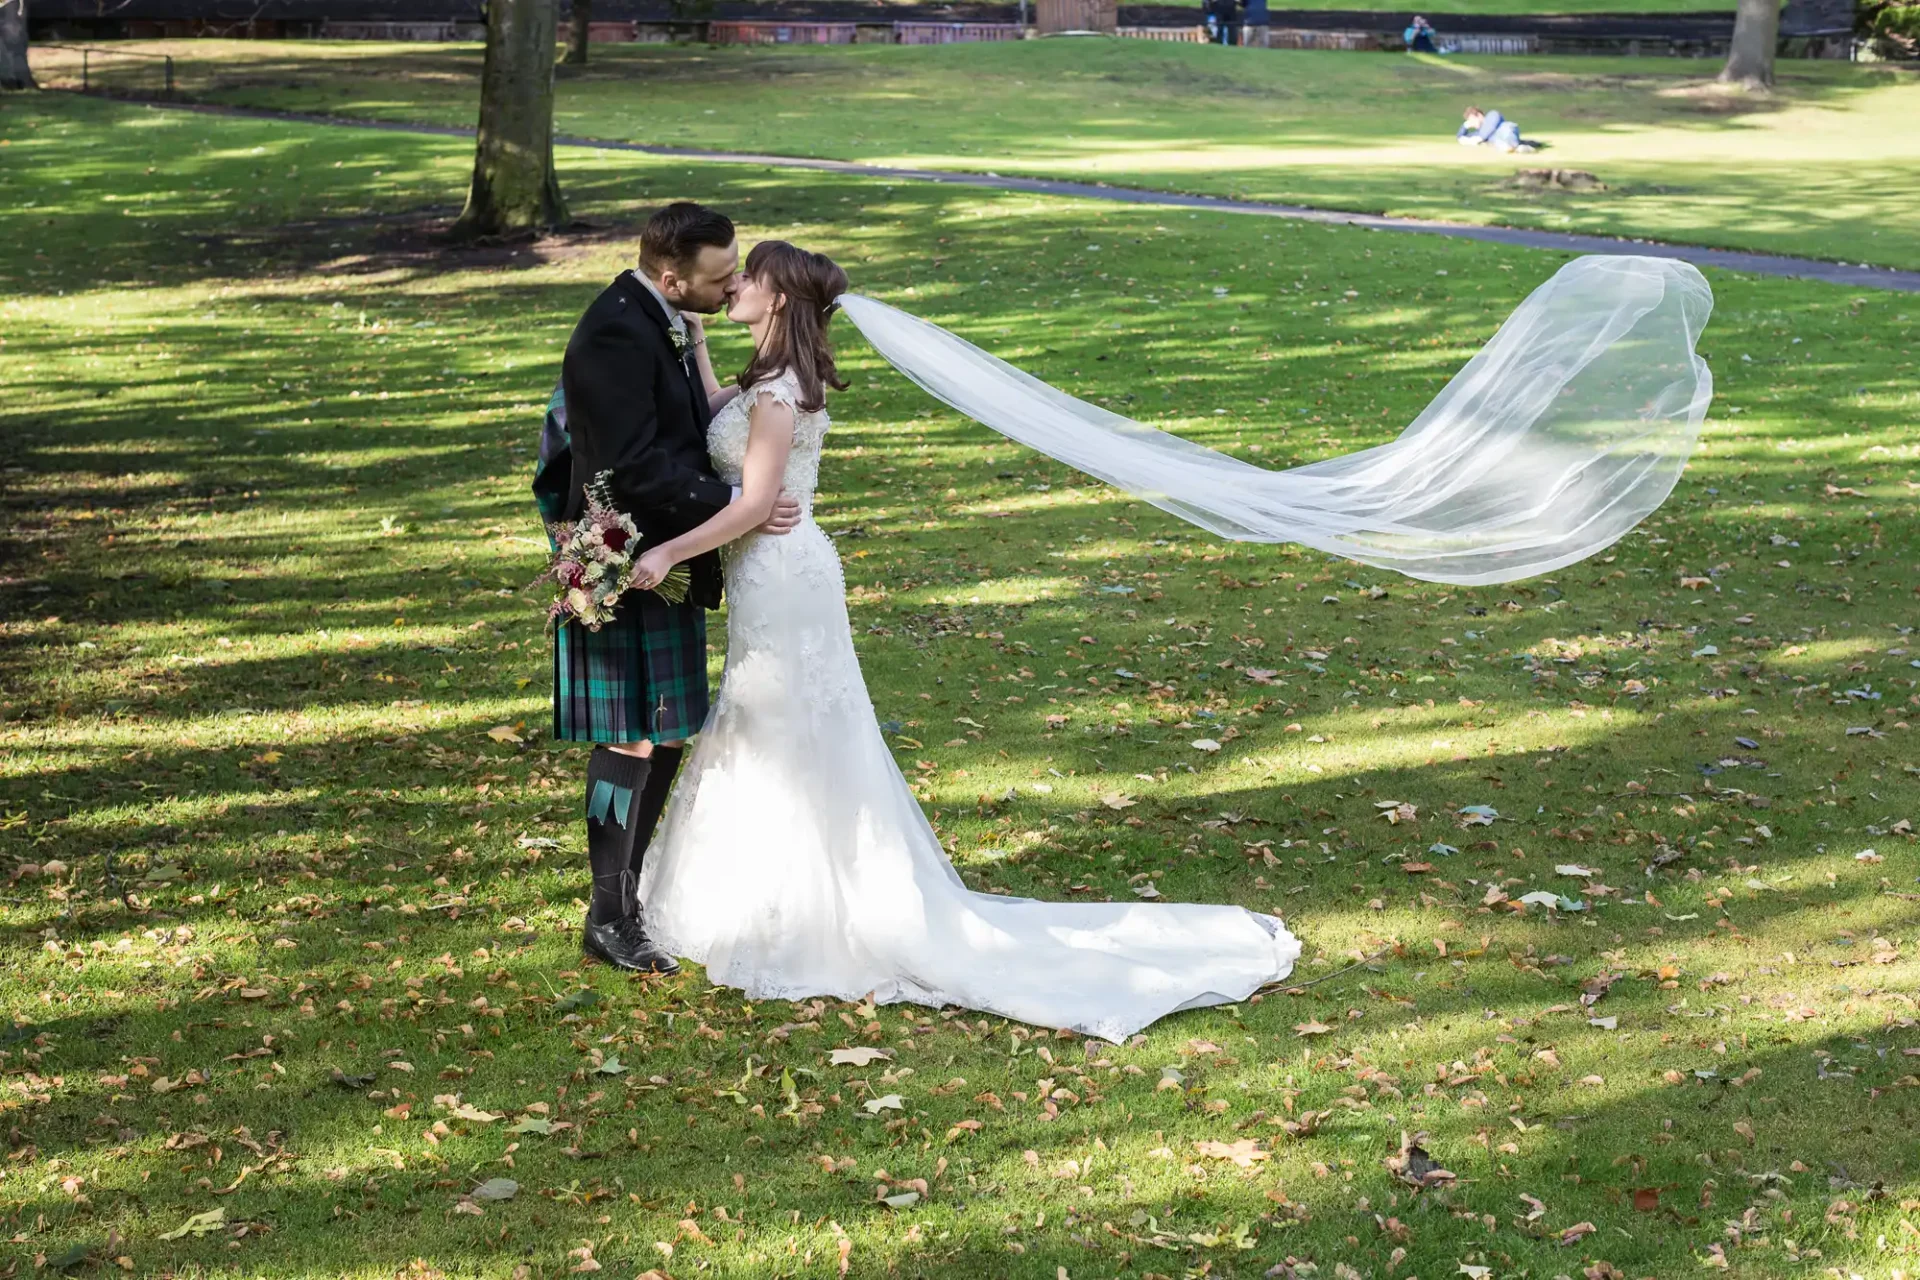 A bride and groom embracing in a park, the bride's long veil flowing in the breeze, with trees and grass around them.